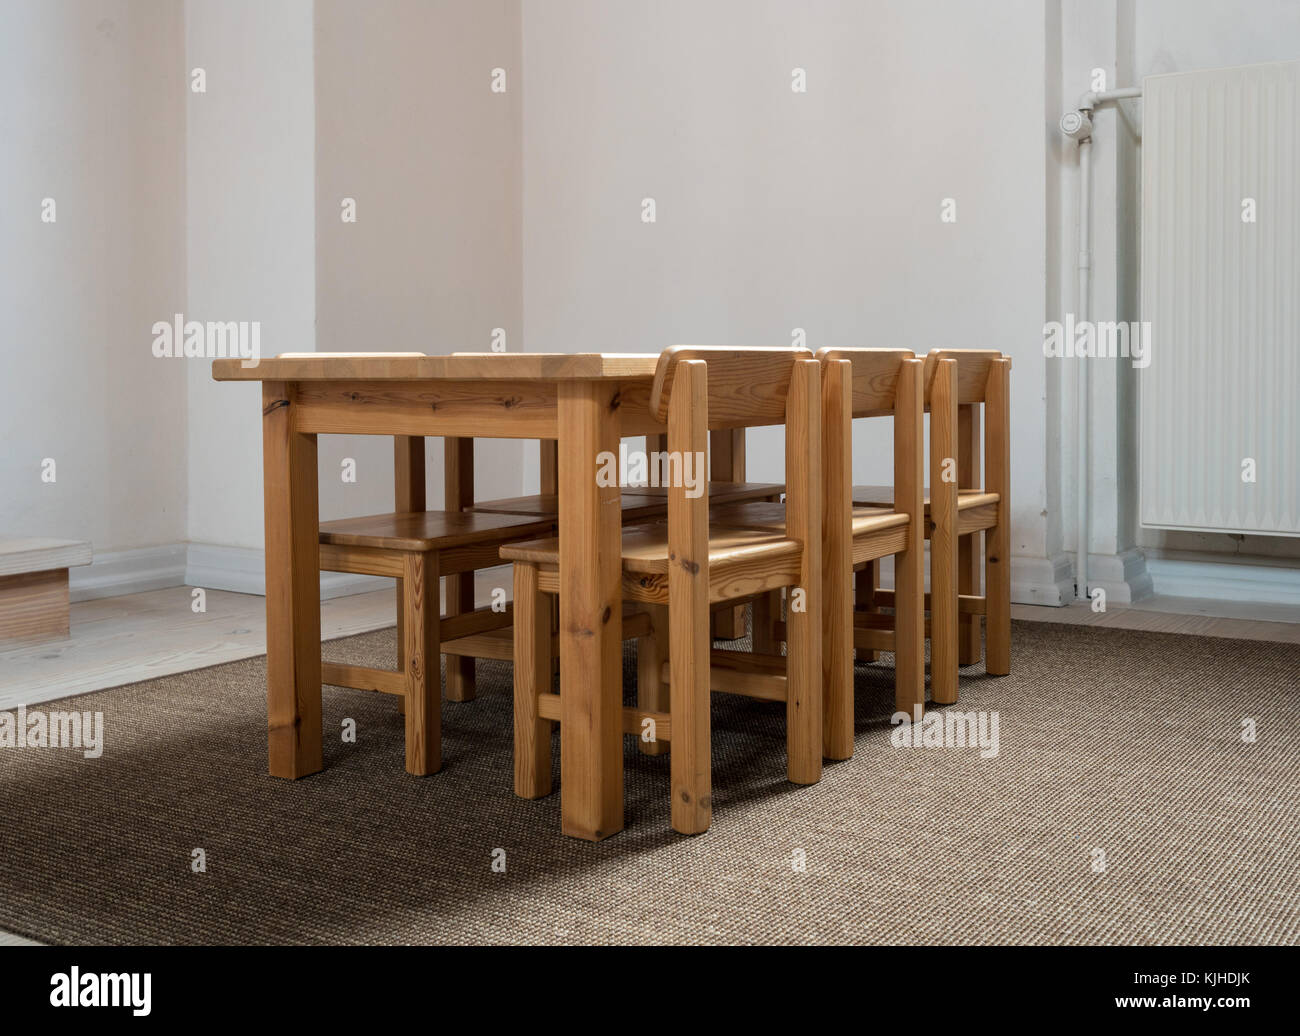 Child Sized Table And Six Chairs In Classroom Stock Photo